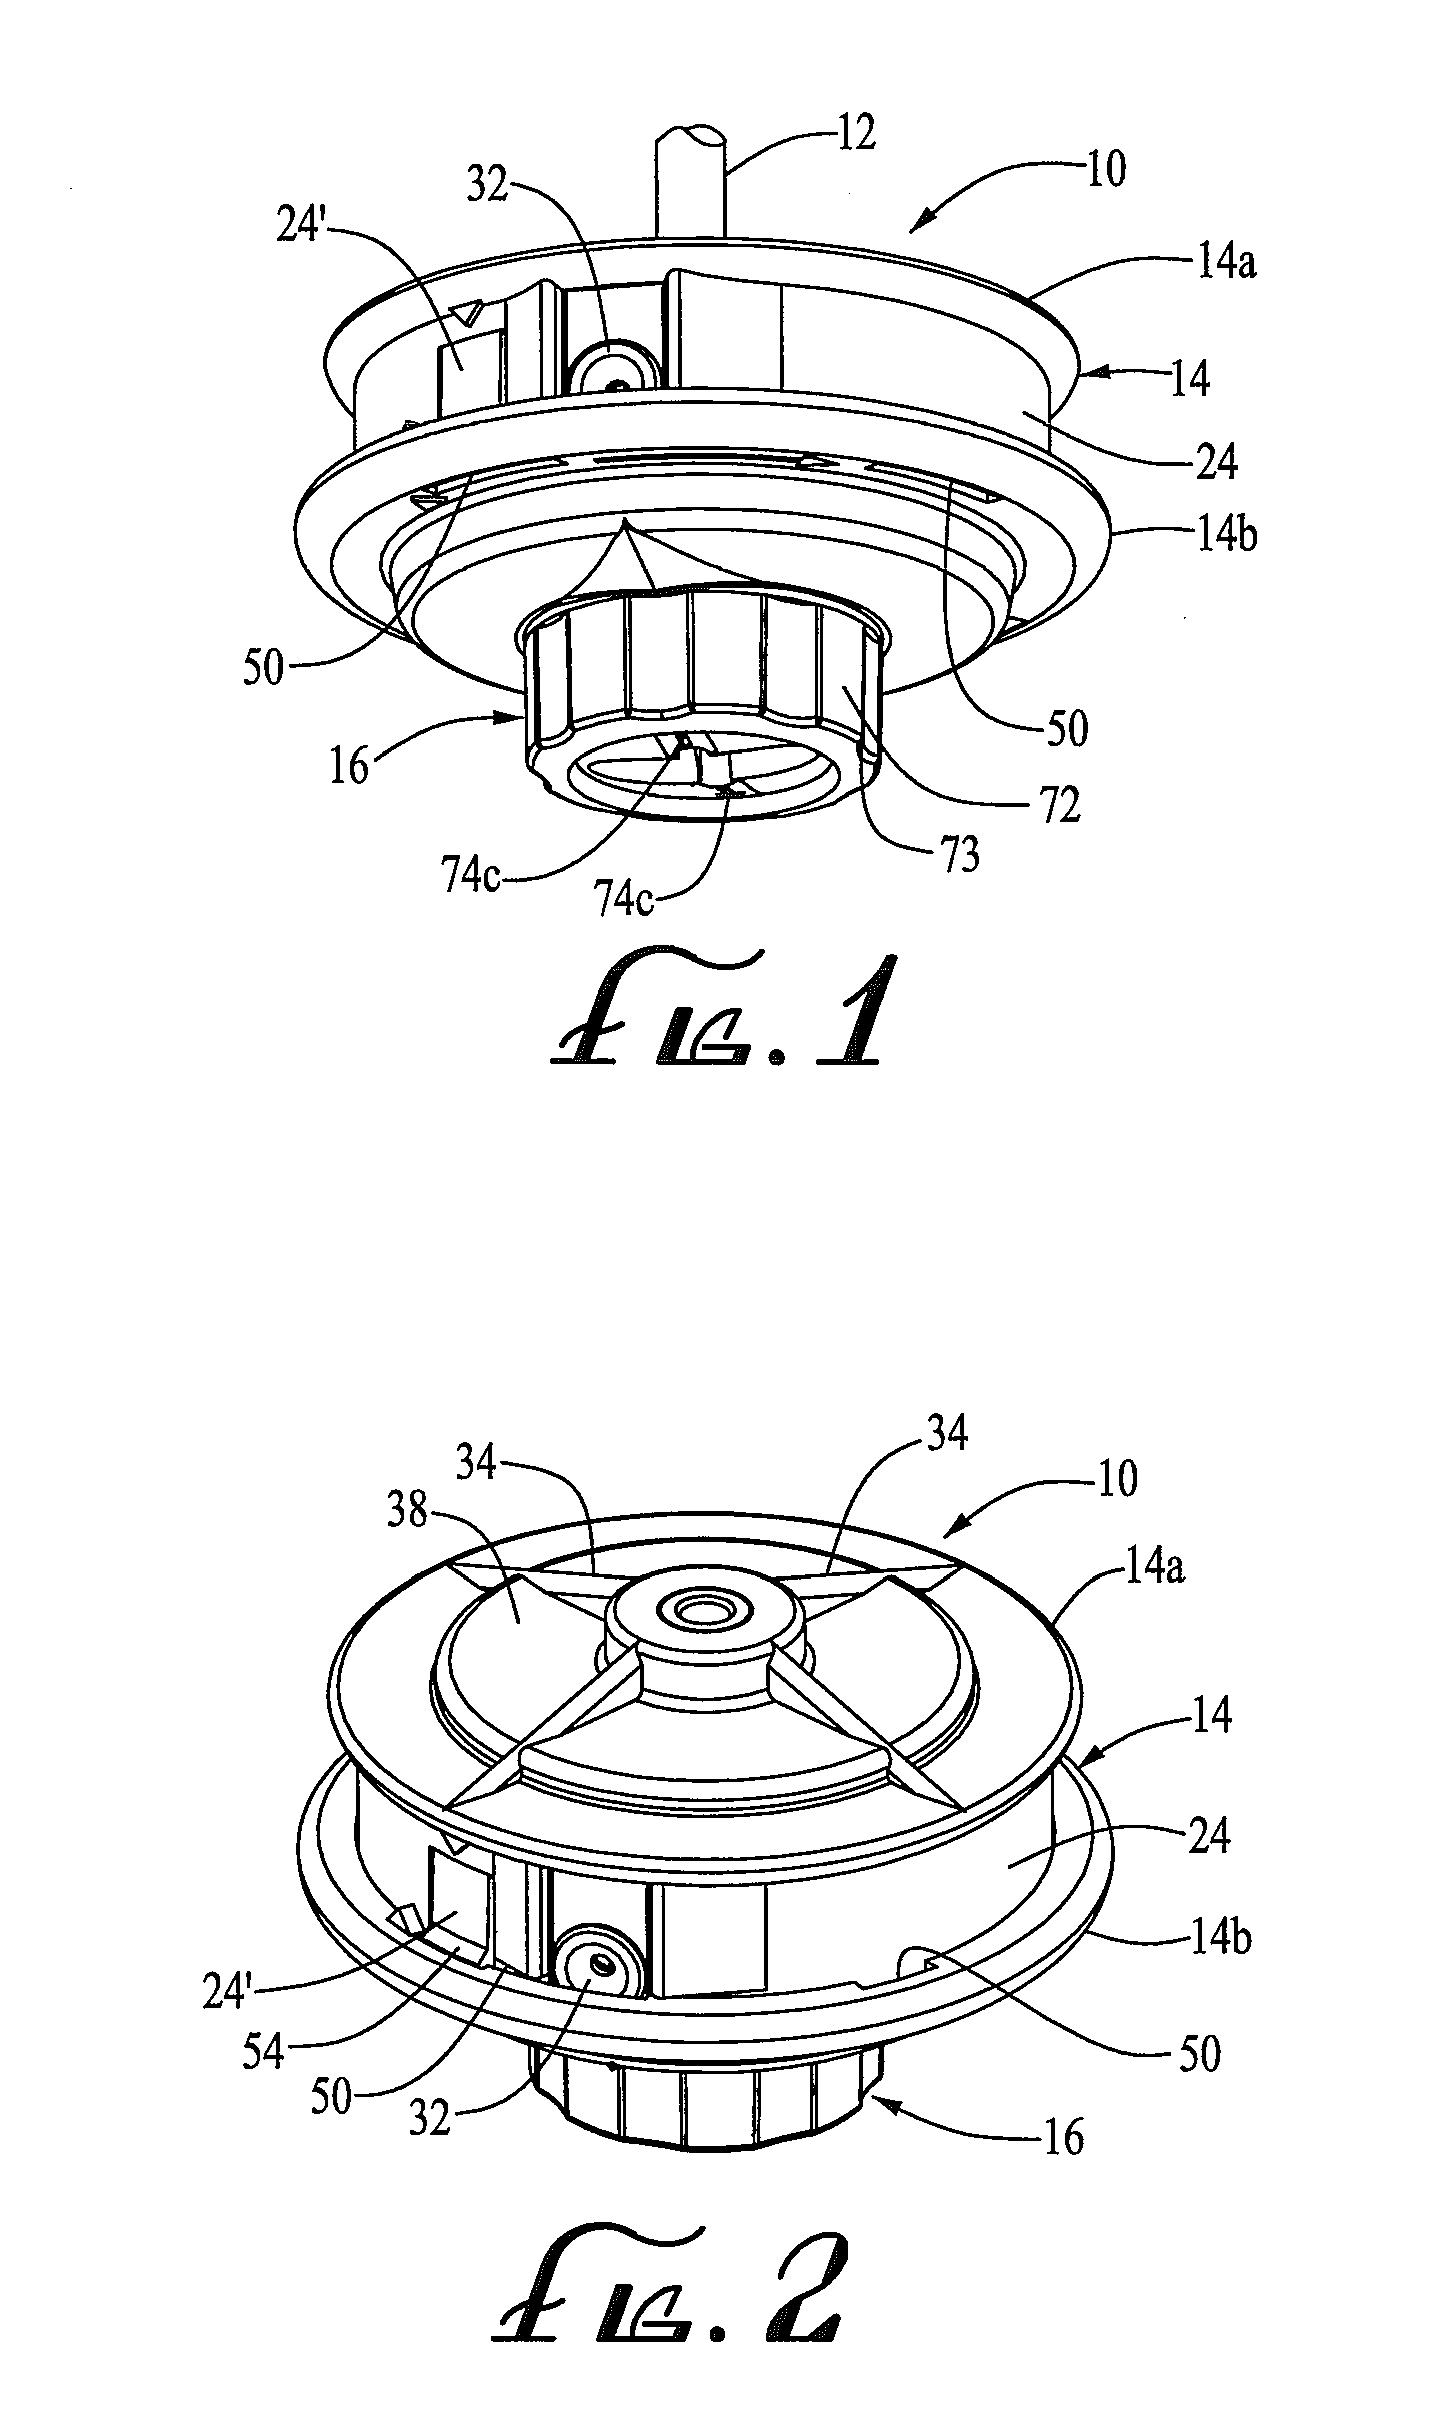 Trimmer Head For Use In Flexible Line Rotary Trimmers Having Improved Line Loading Mechanism